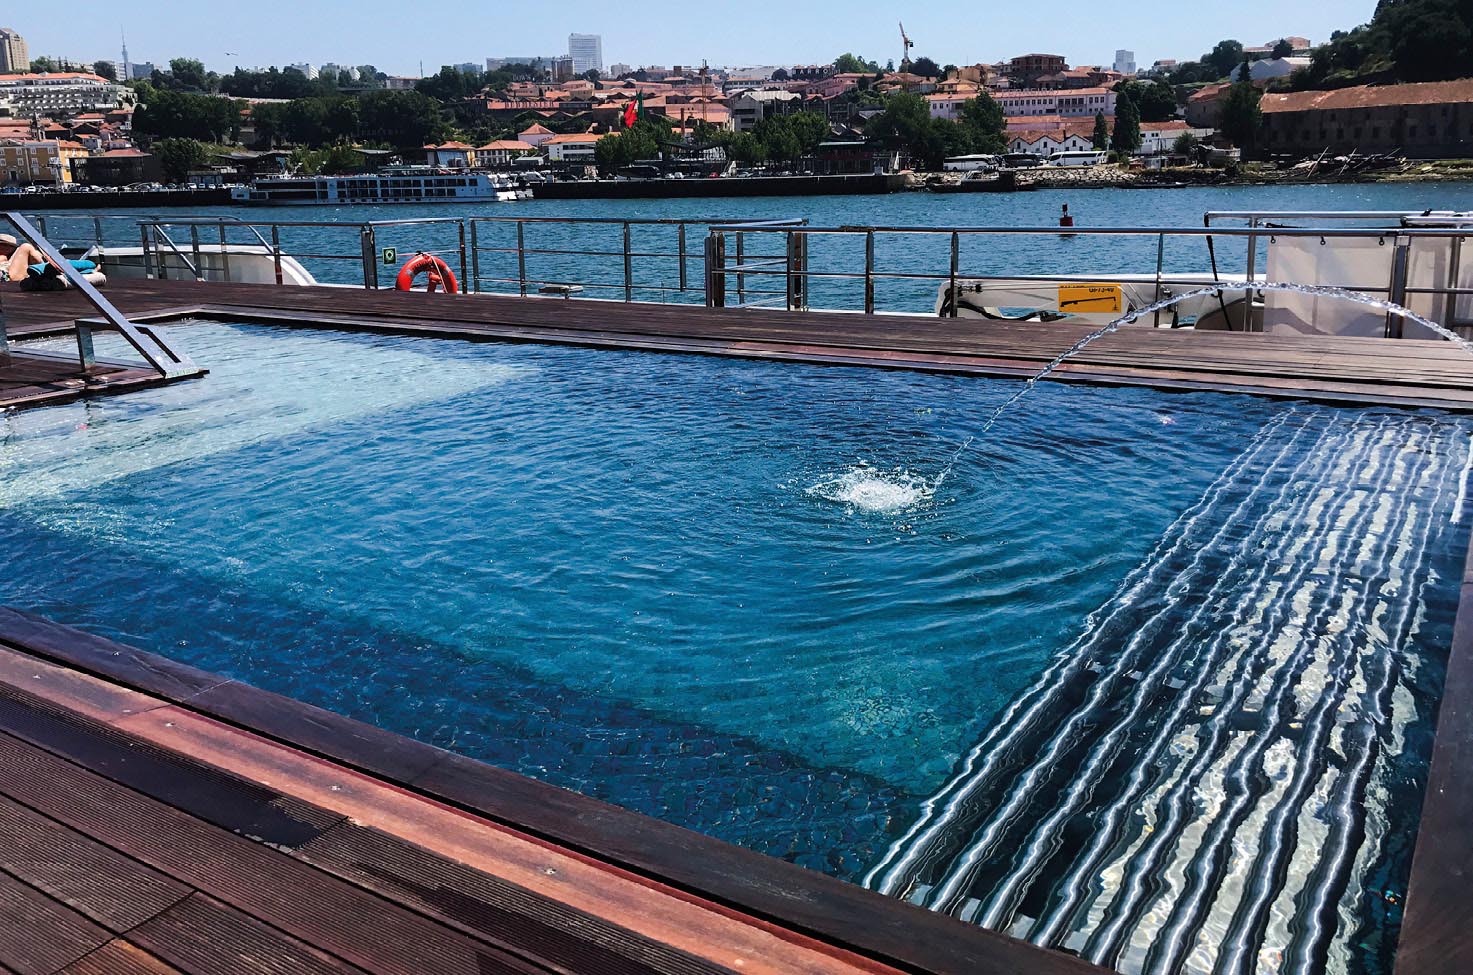 A view of the Serenity Pool found on the Emerald Radiance Star-Ship. A spacious blue pool is seen on an open deck with views of the Portuguese landscape in the background. 